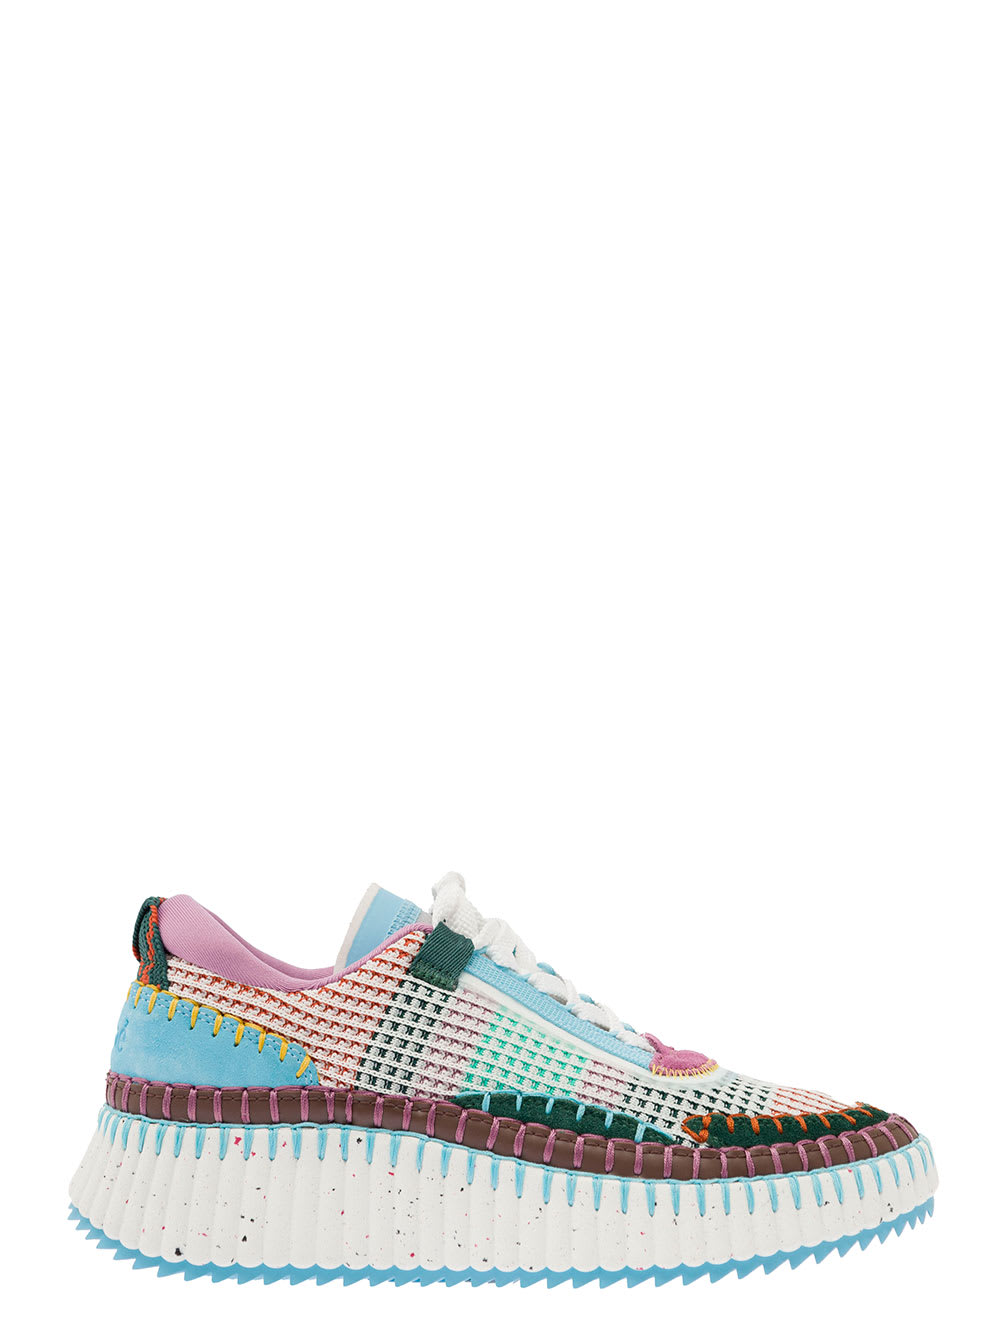 CHLOÉ MULTICOLOR NAMA SNEAKERS WITH MESH DESIGN IN FABRIC WOMAN